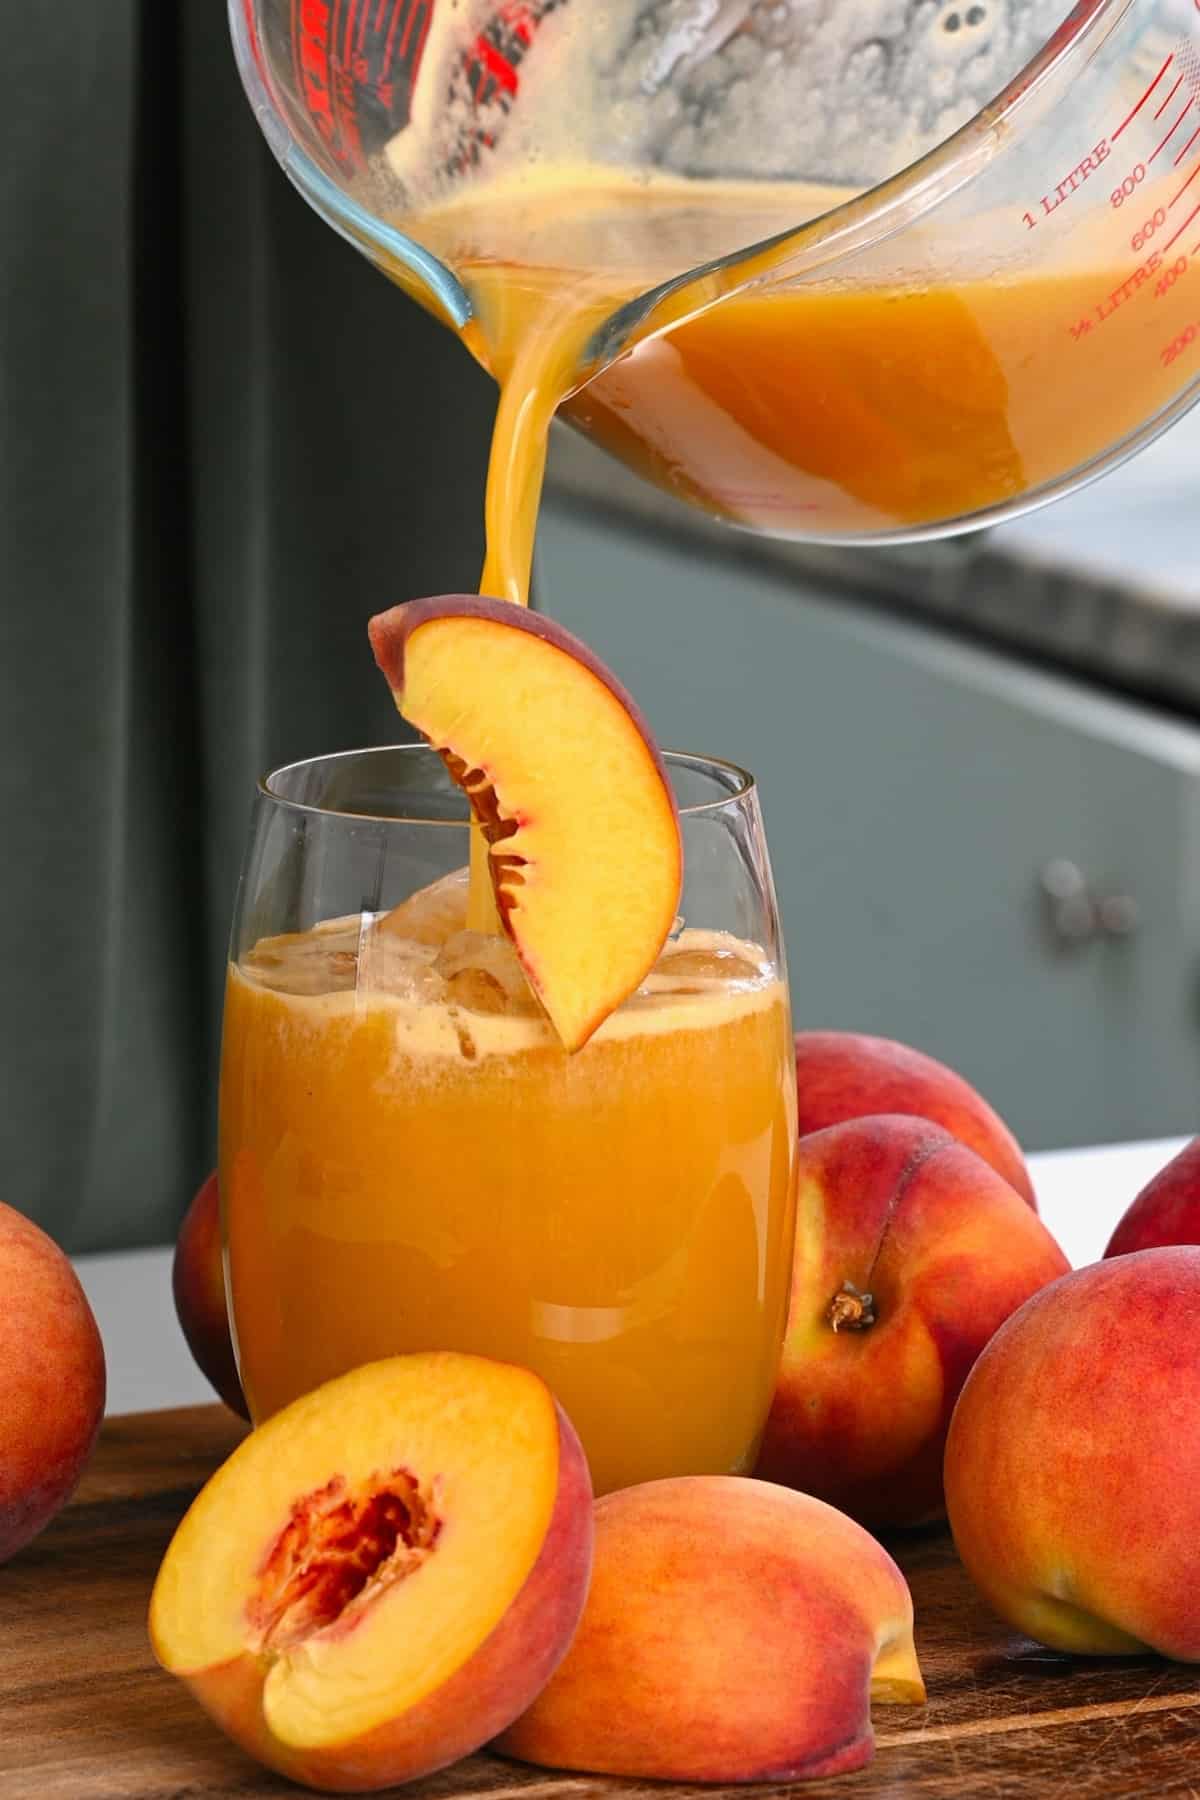 Pouring peach juice into a glass